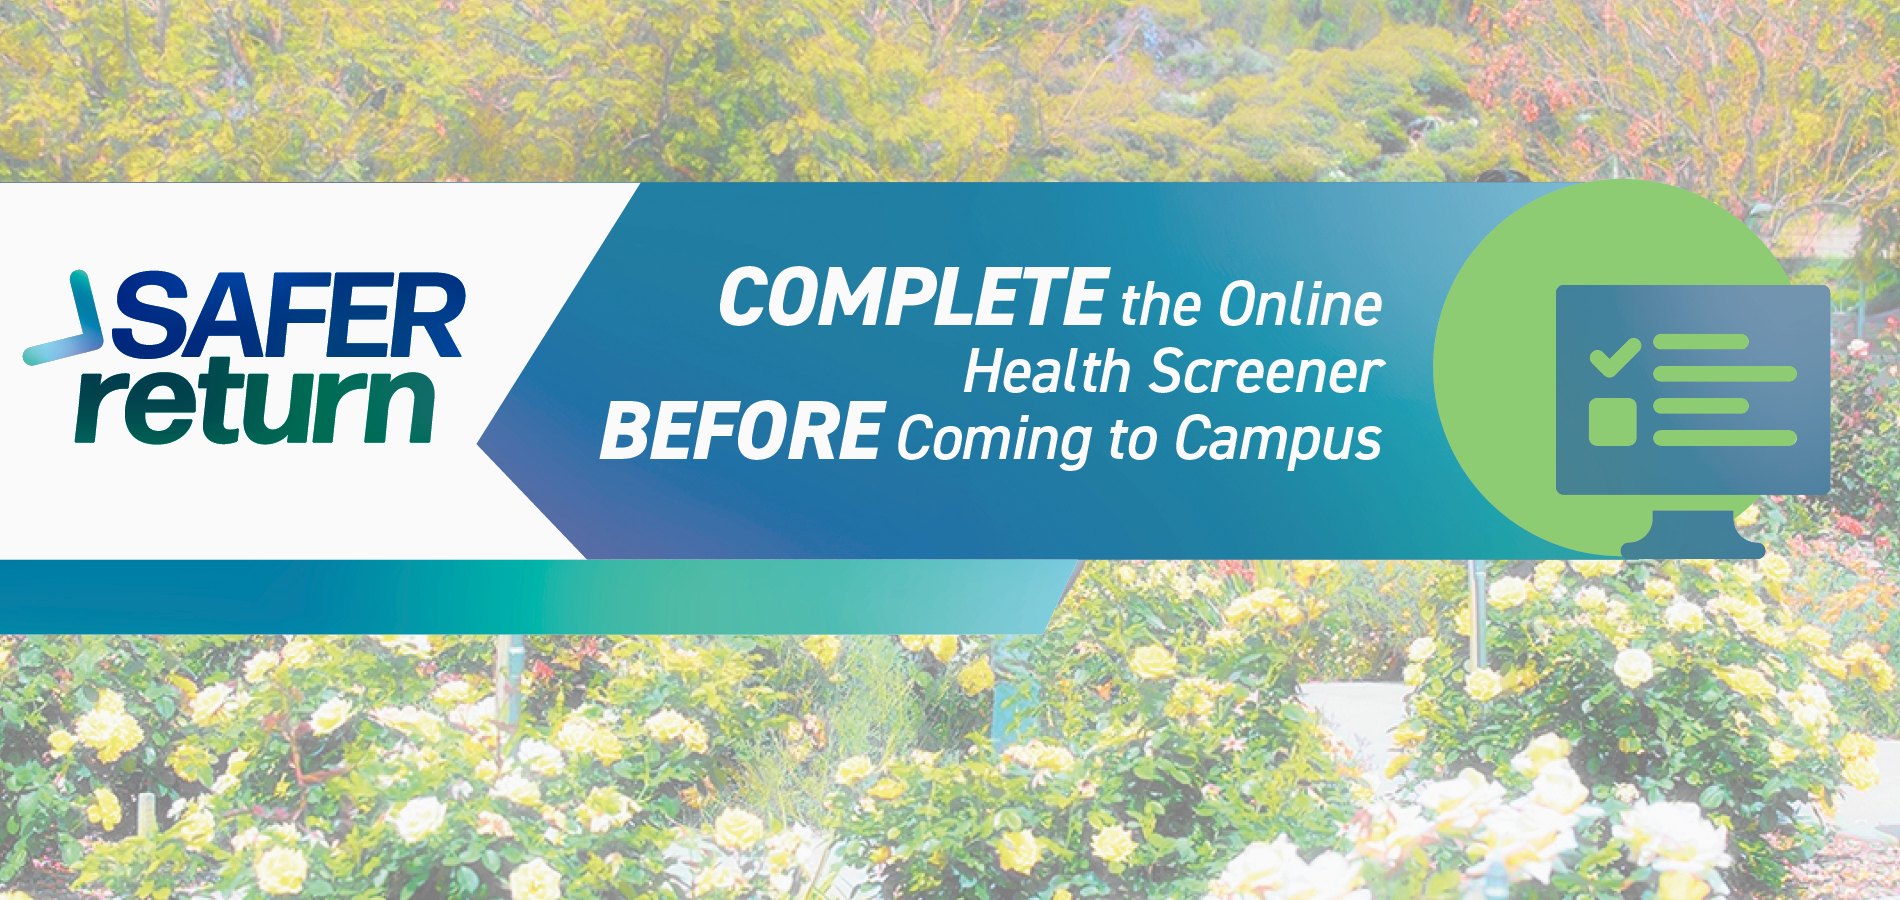 complete the online health screener before returning to campus